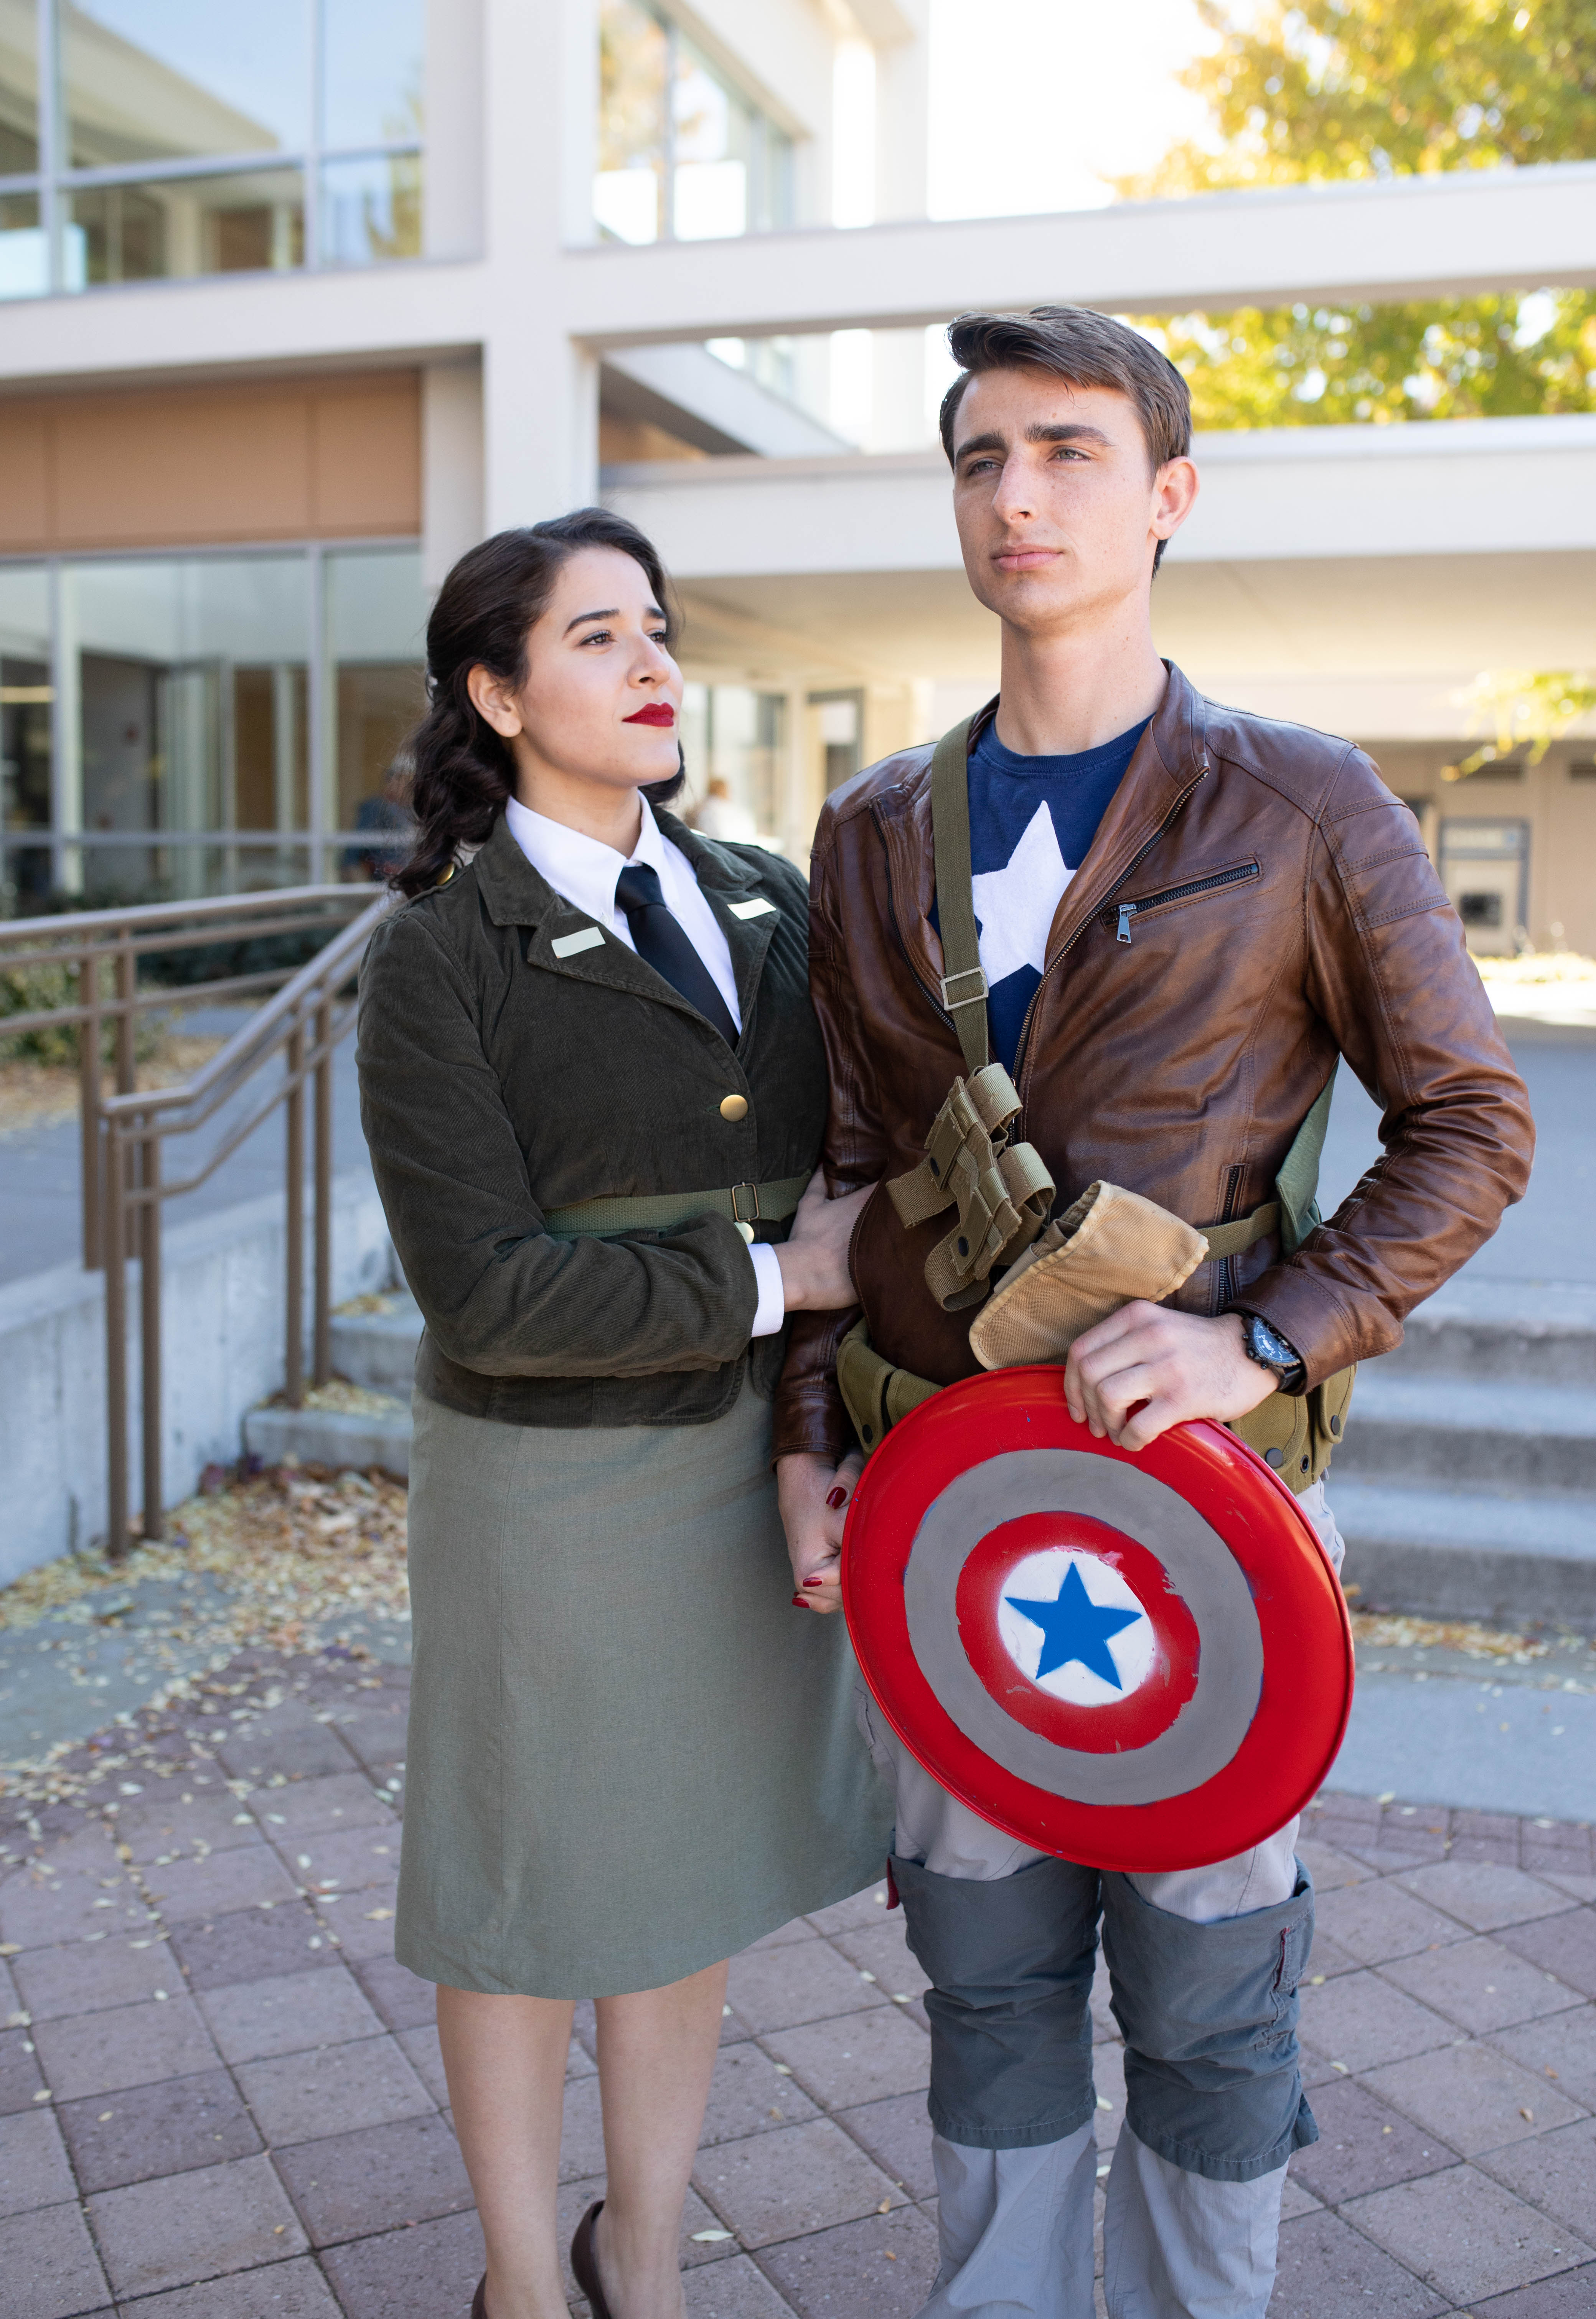 Costumes transform BYU campus on Halloween - The Daily Universe